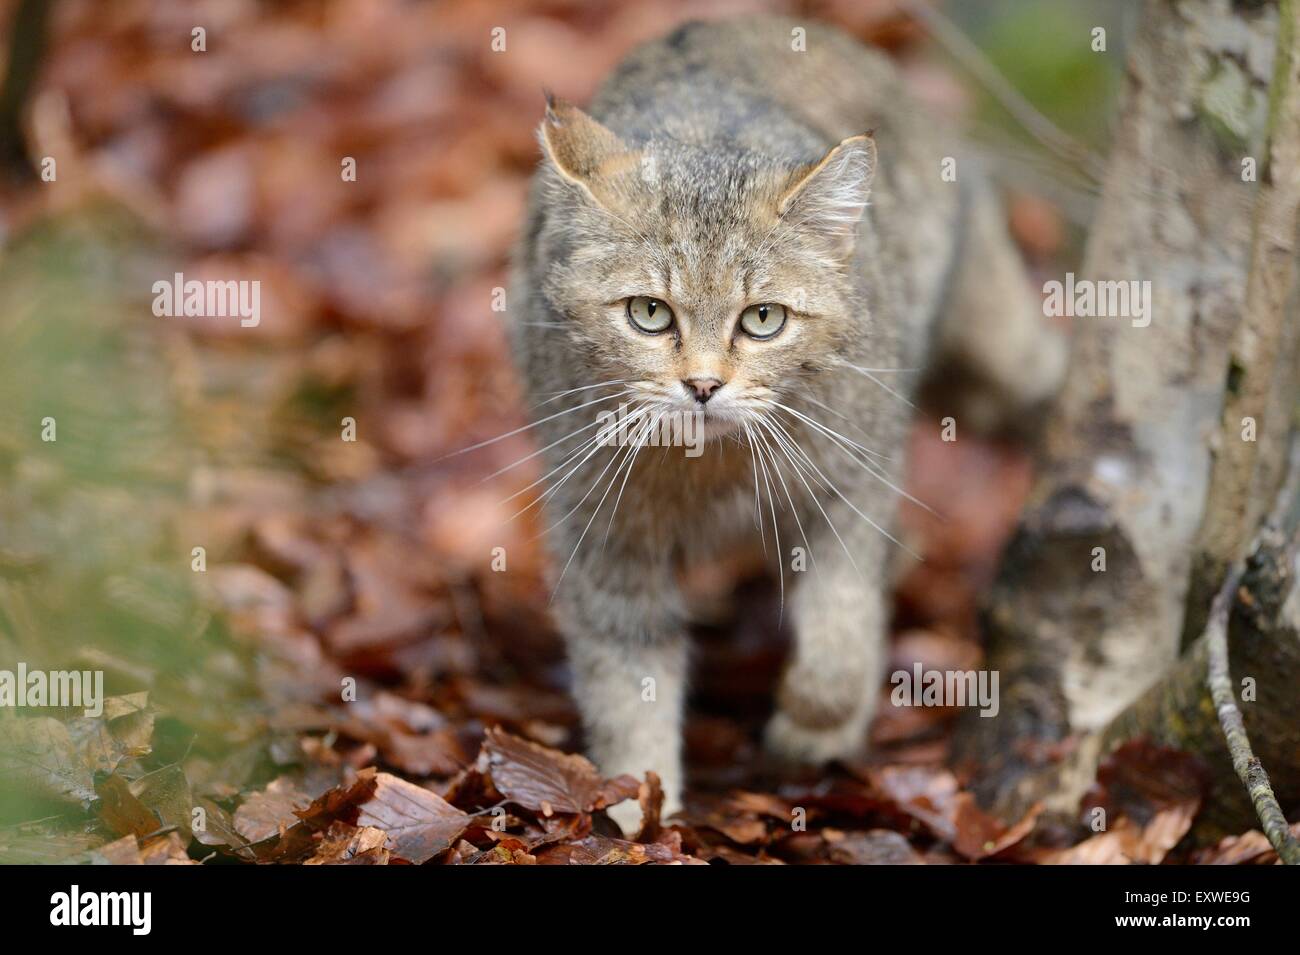 European wildcat in Bavarian Forest National Park, Germany Stock Photo